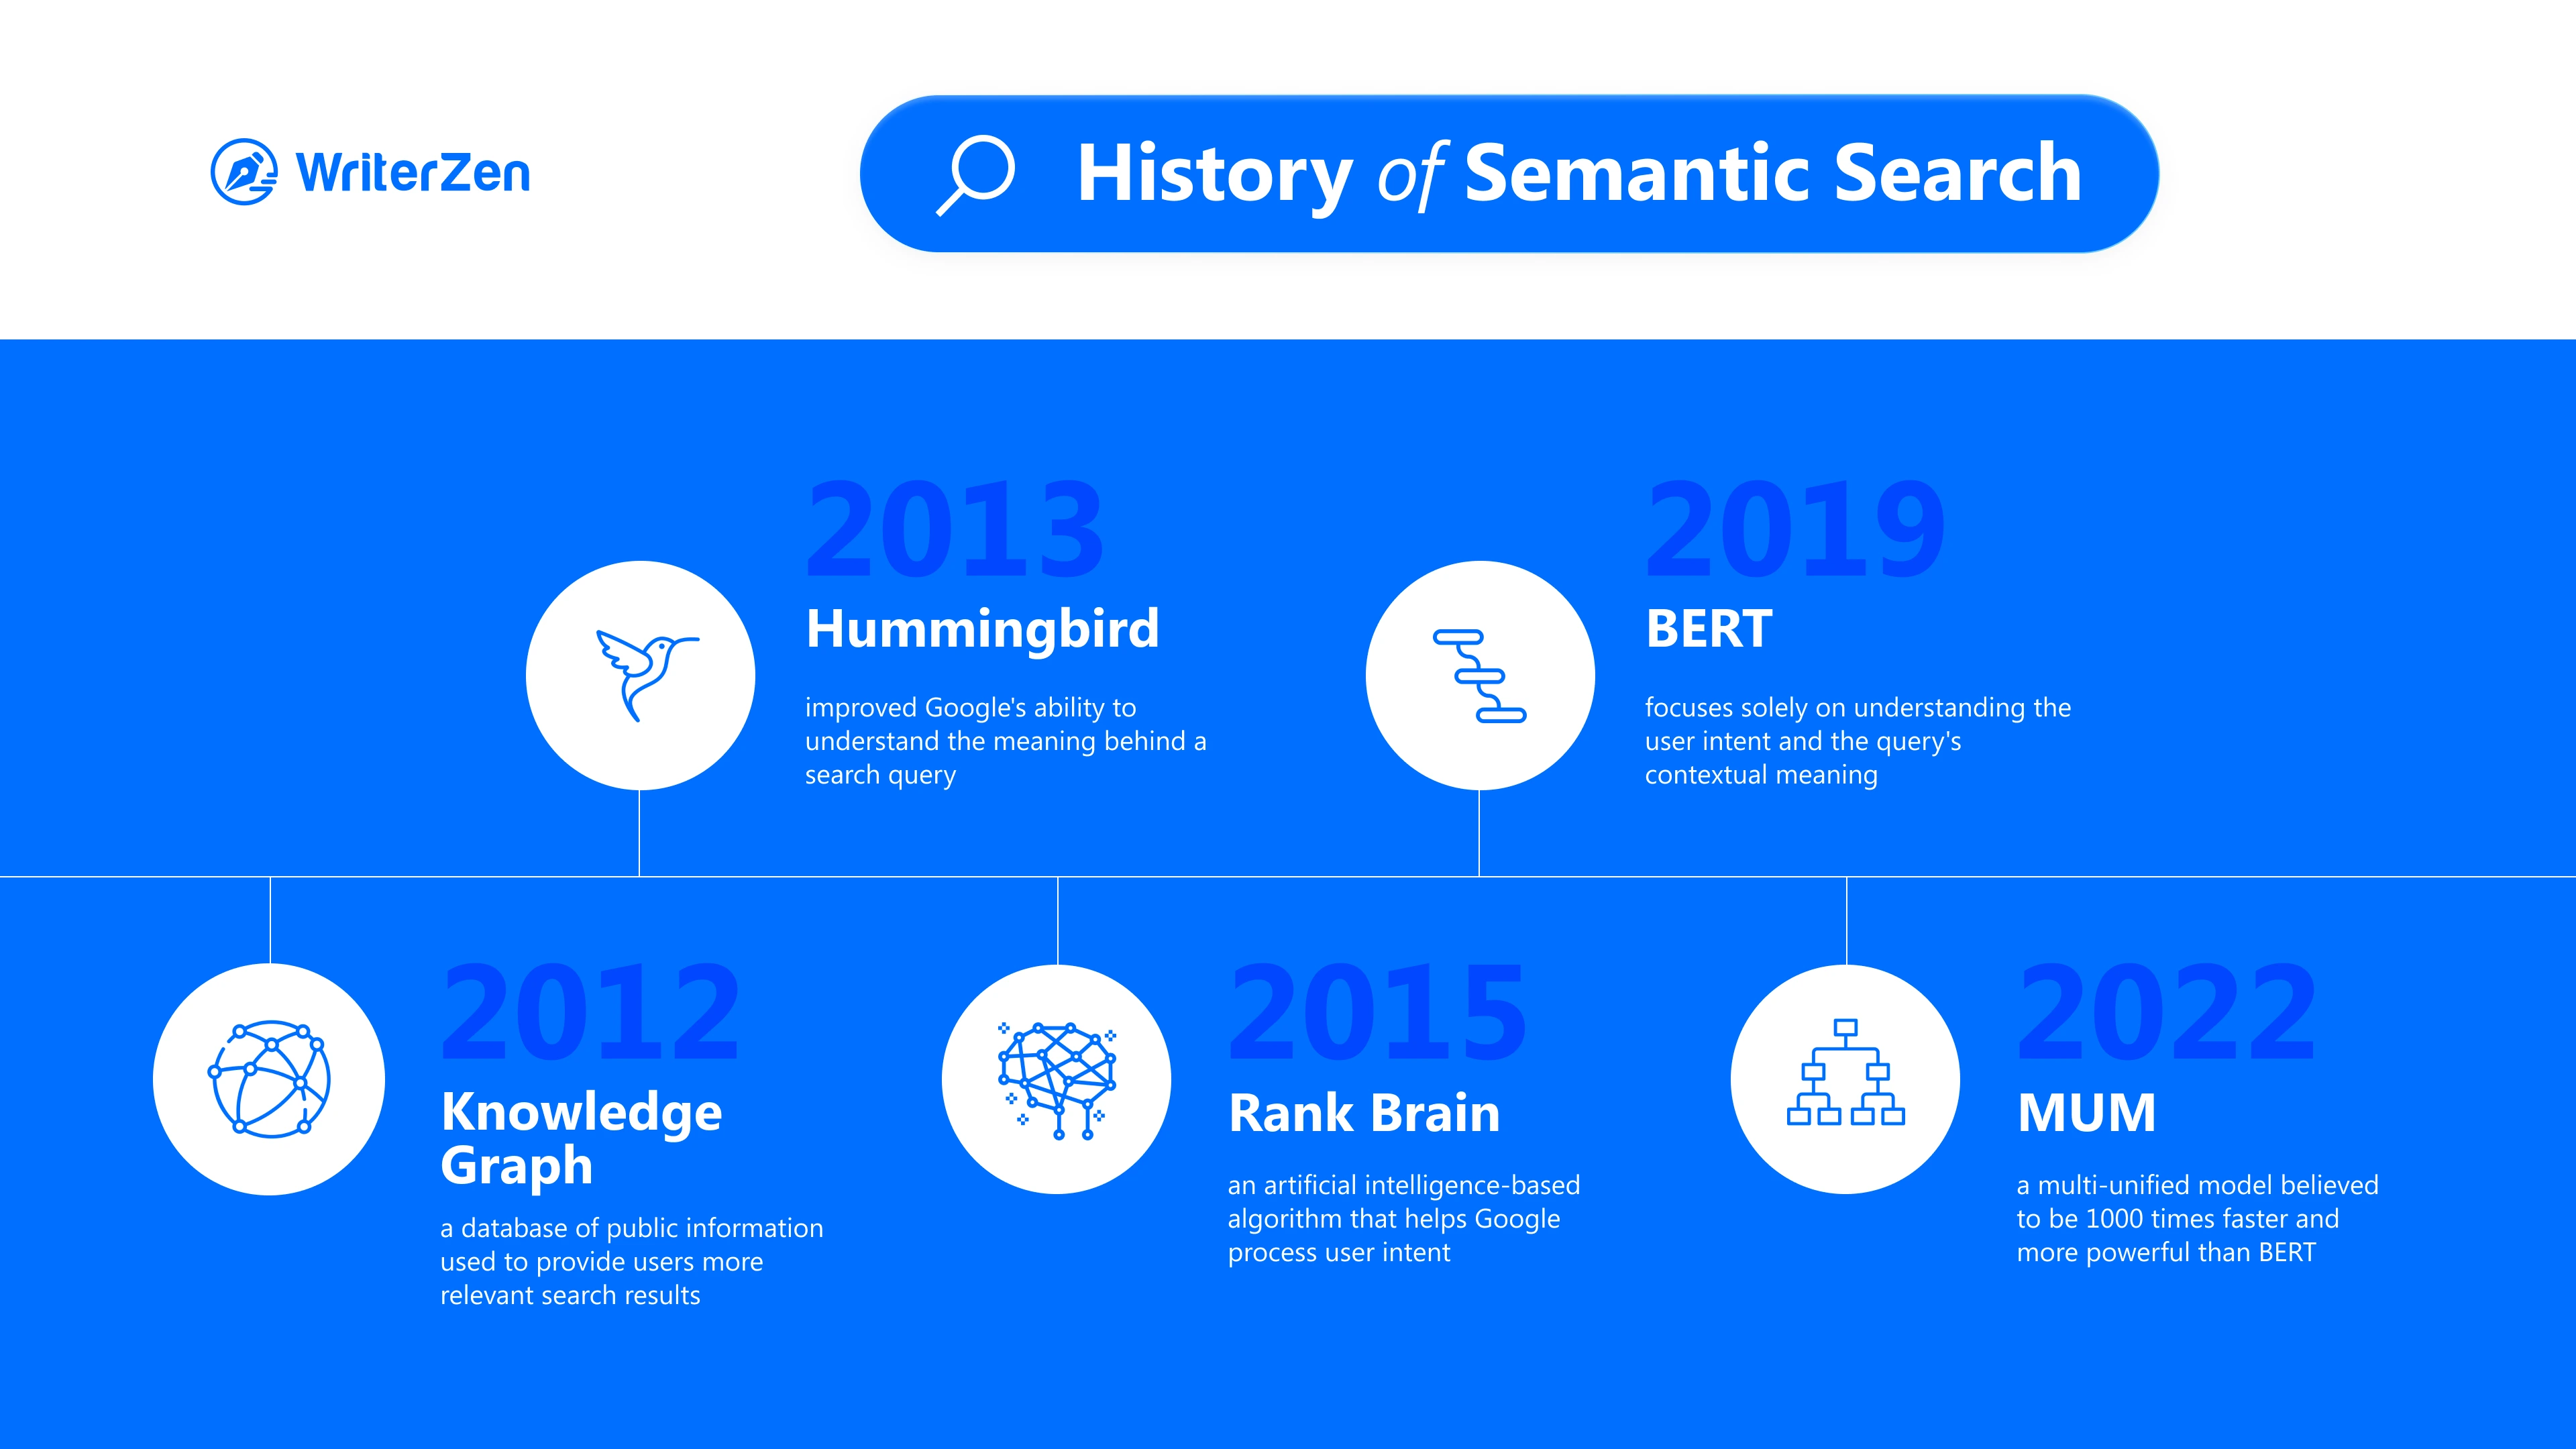 History of Semantic Search